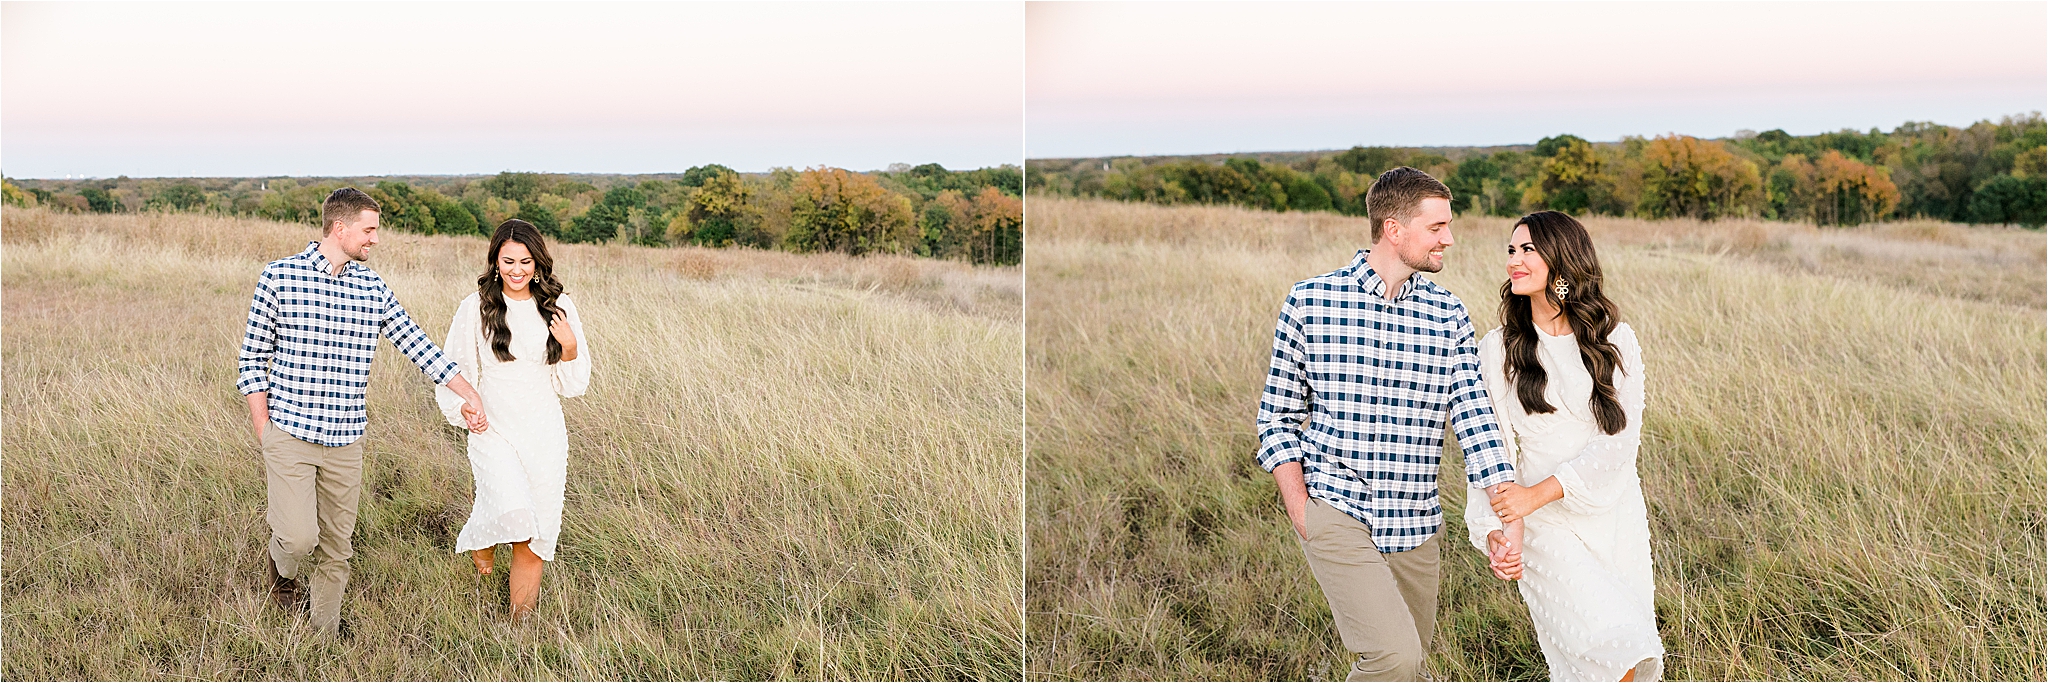 An engaged couple runs through a field at sunset during their sunset engagement session in Dallas, Texas 